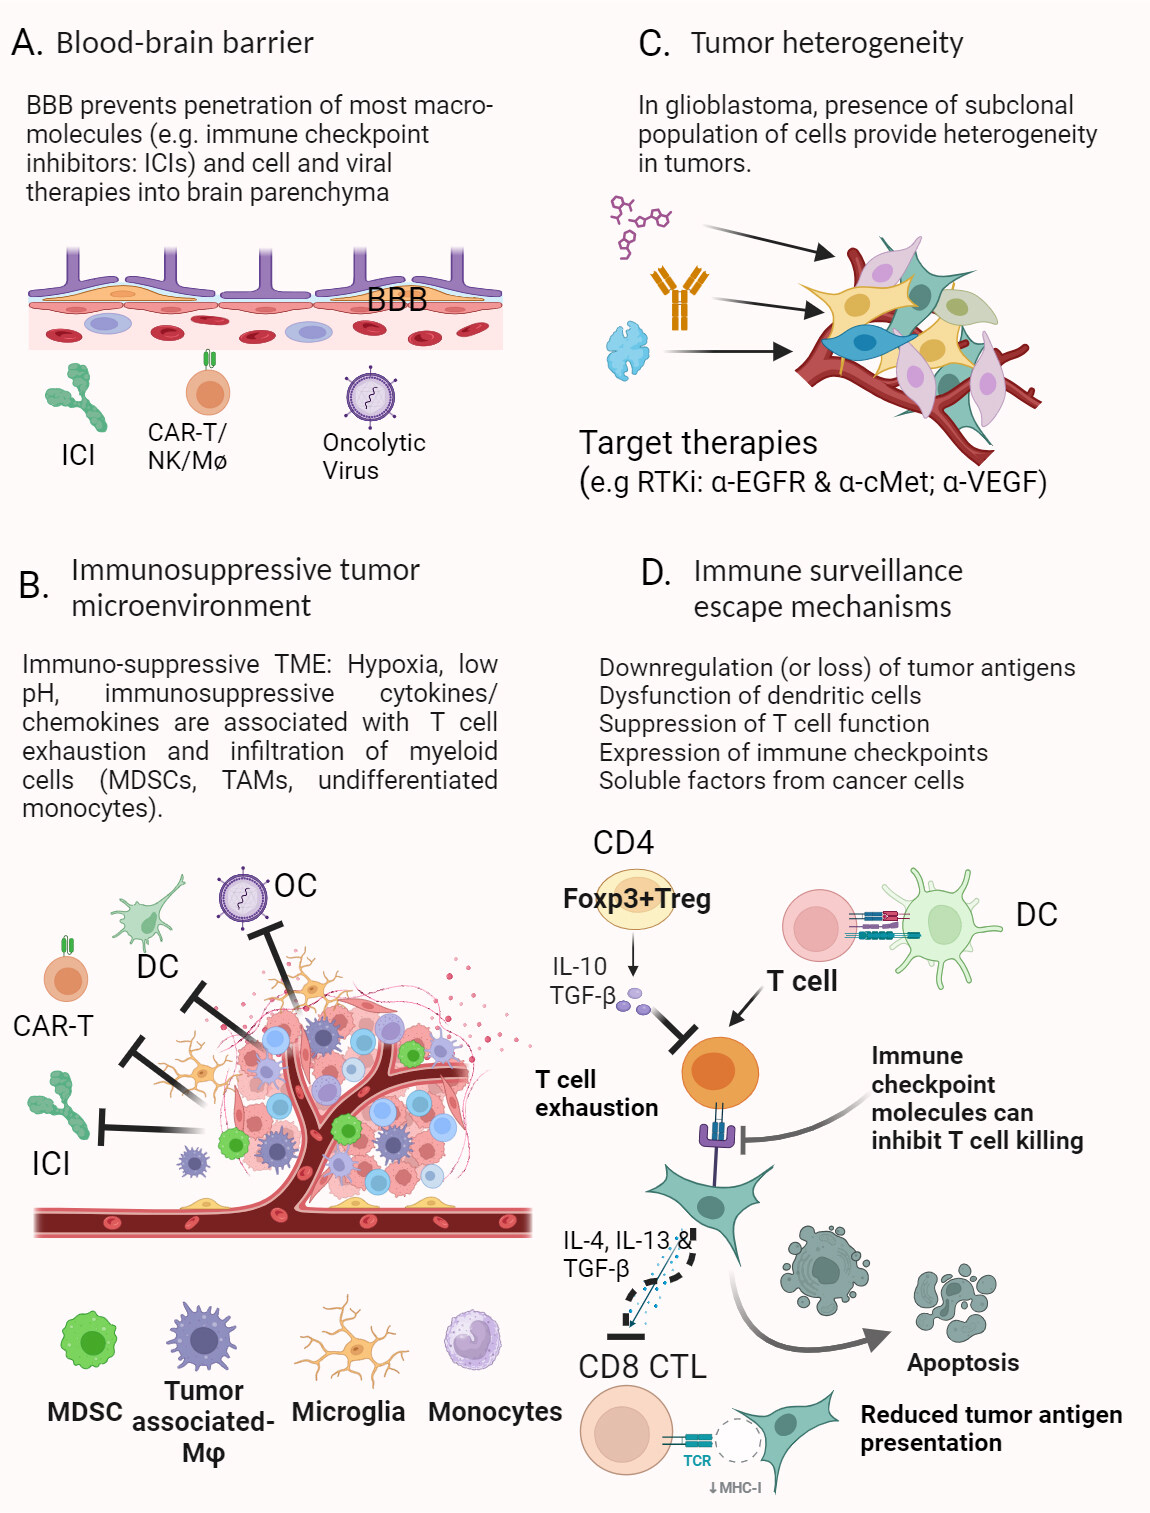 Drug resistance in glioblastoma: from chemo- to immunotherapy